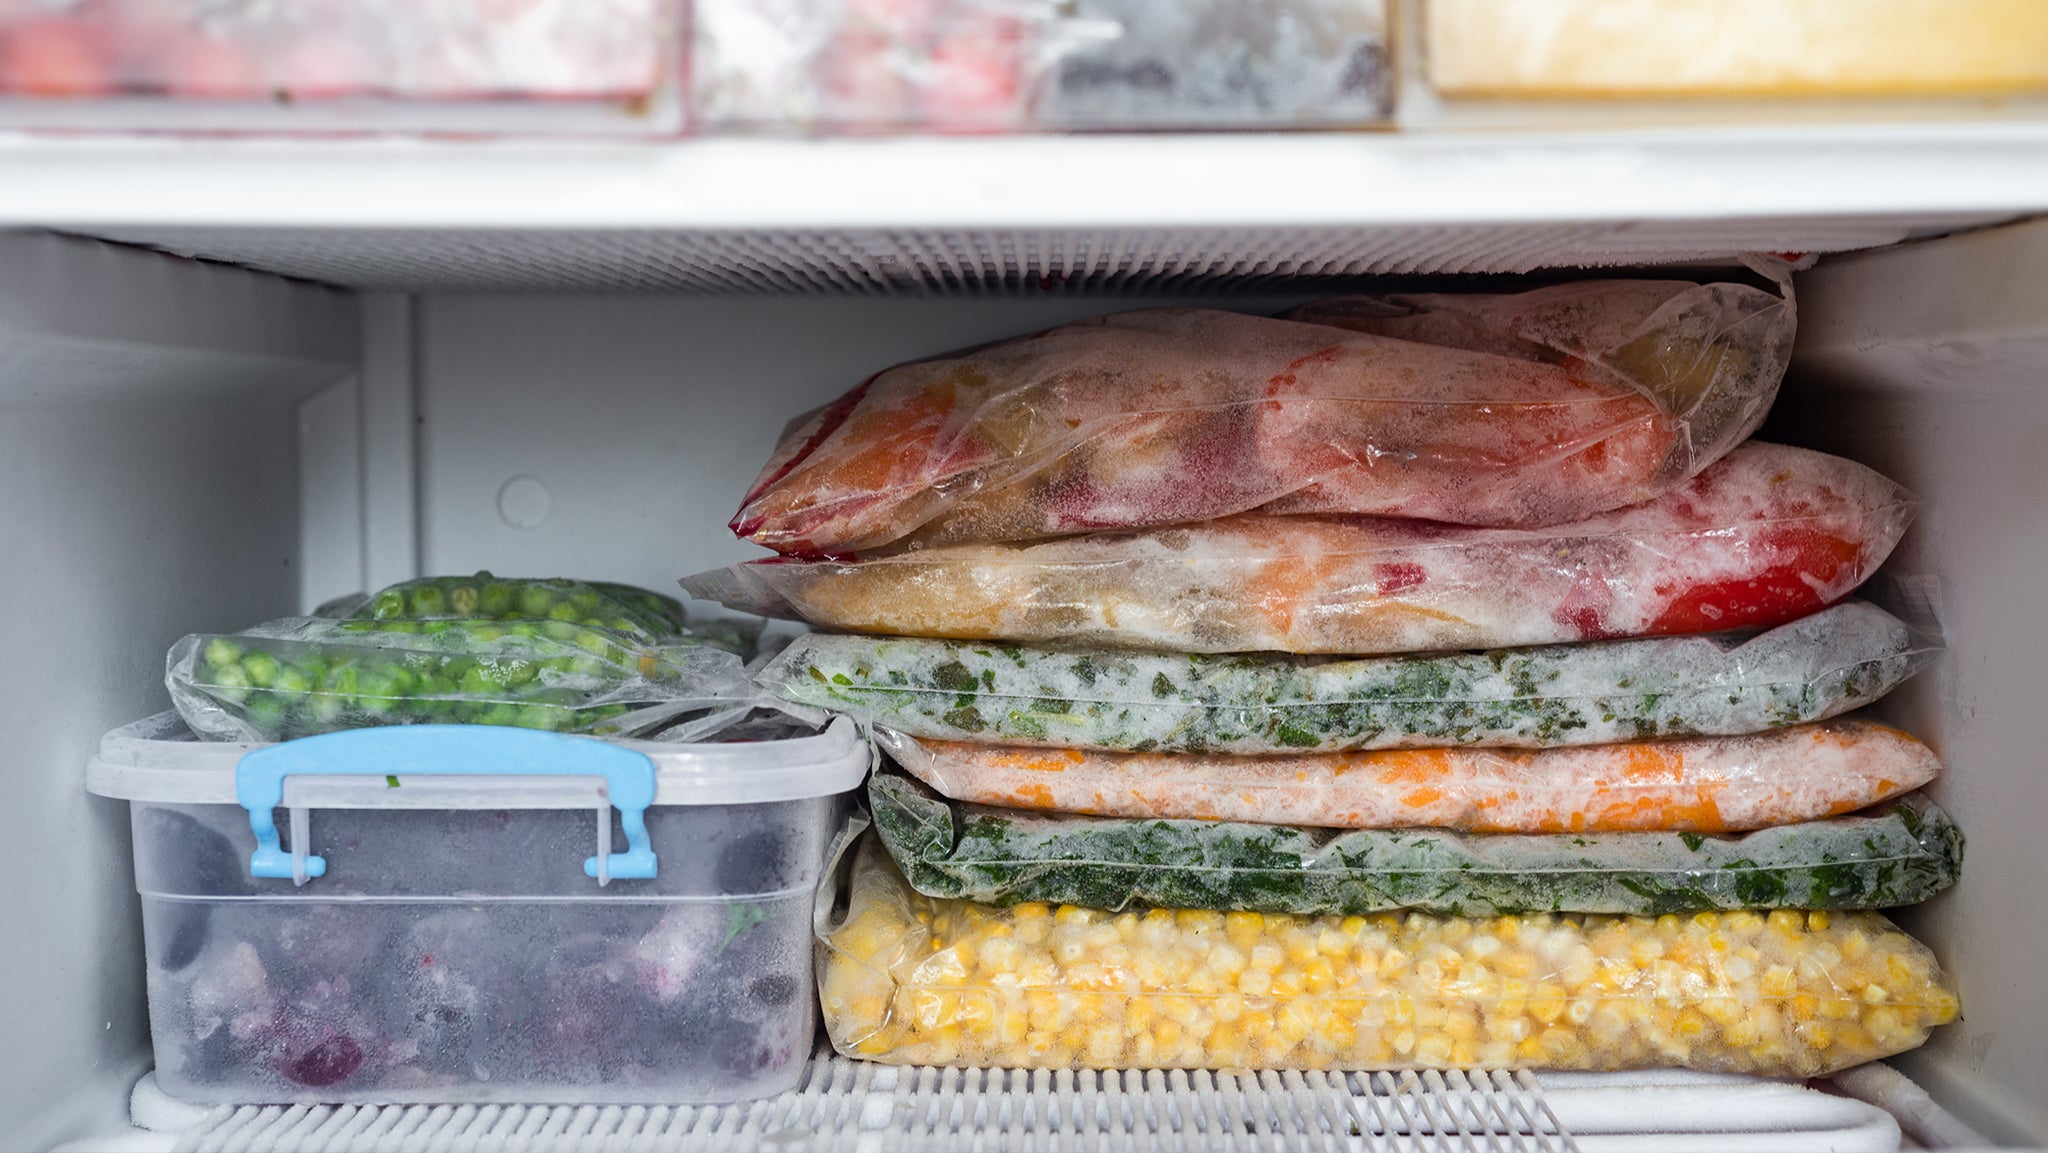 Top 7 Tips for Making Freezer Meals